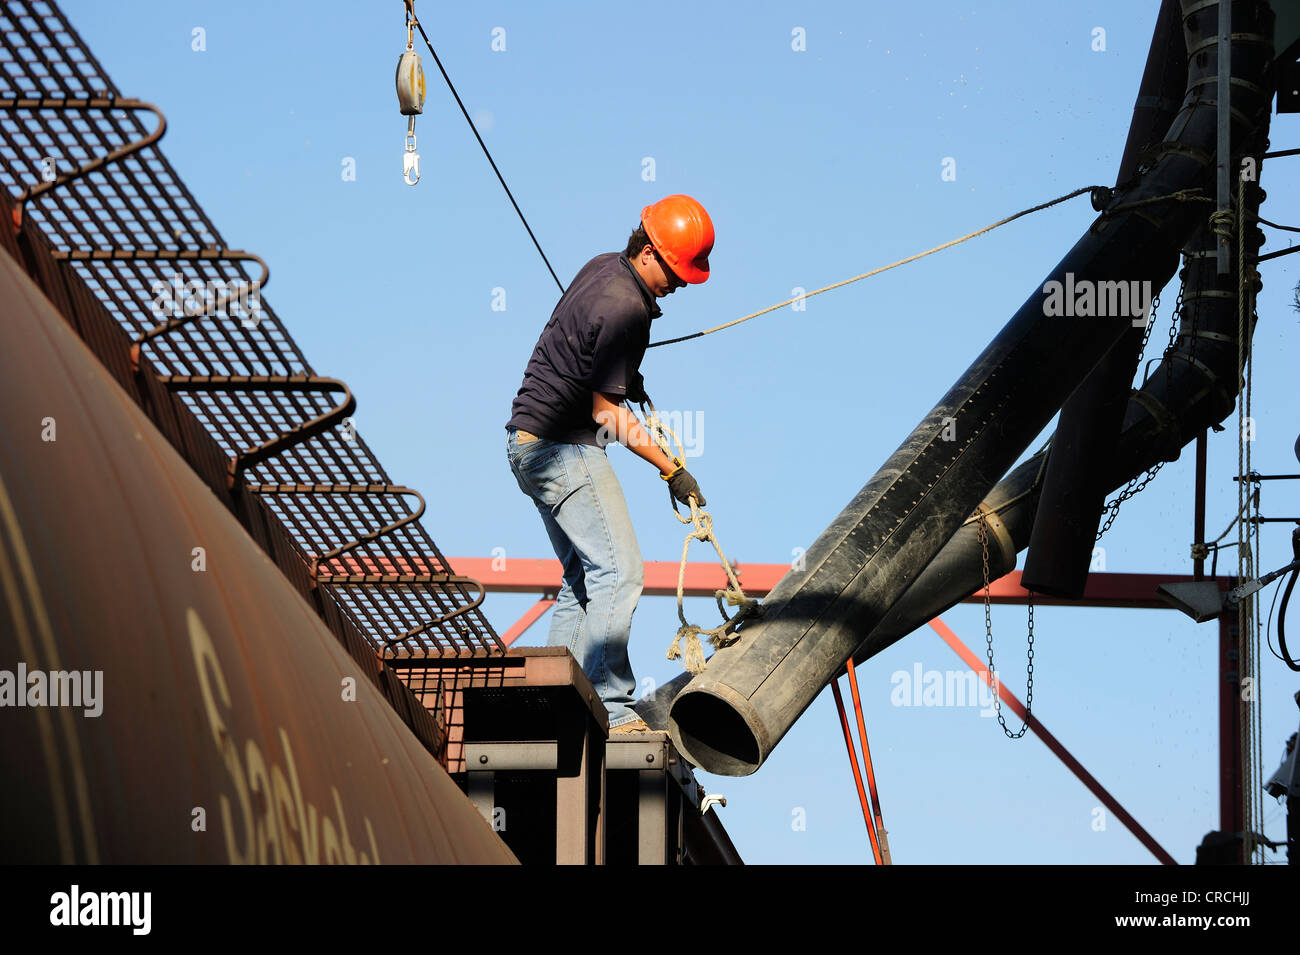 Worker on a train moving the filler hose of the grain silo to the train's opening to fill it with grain, Saskatchewan, Canada Stock Photo